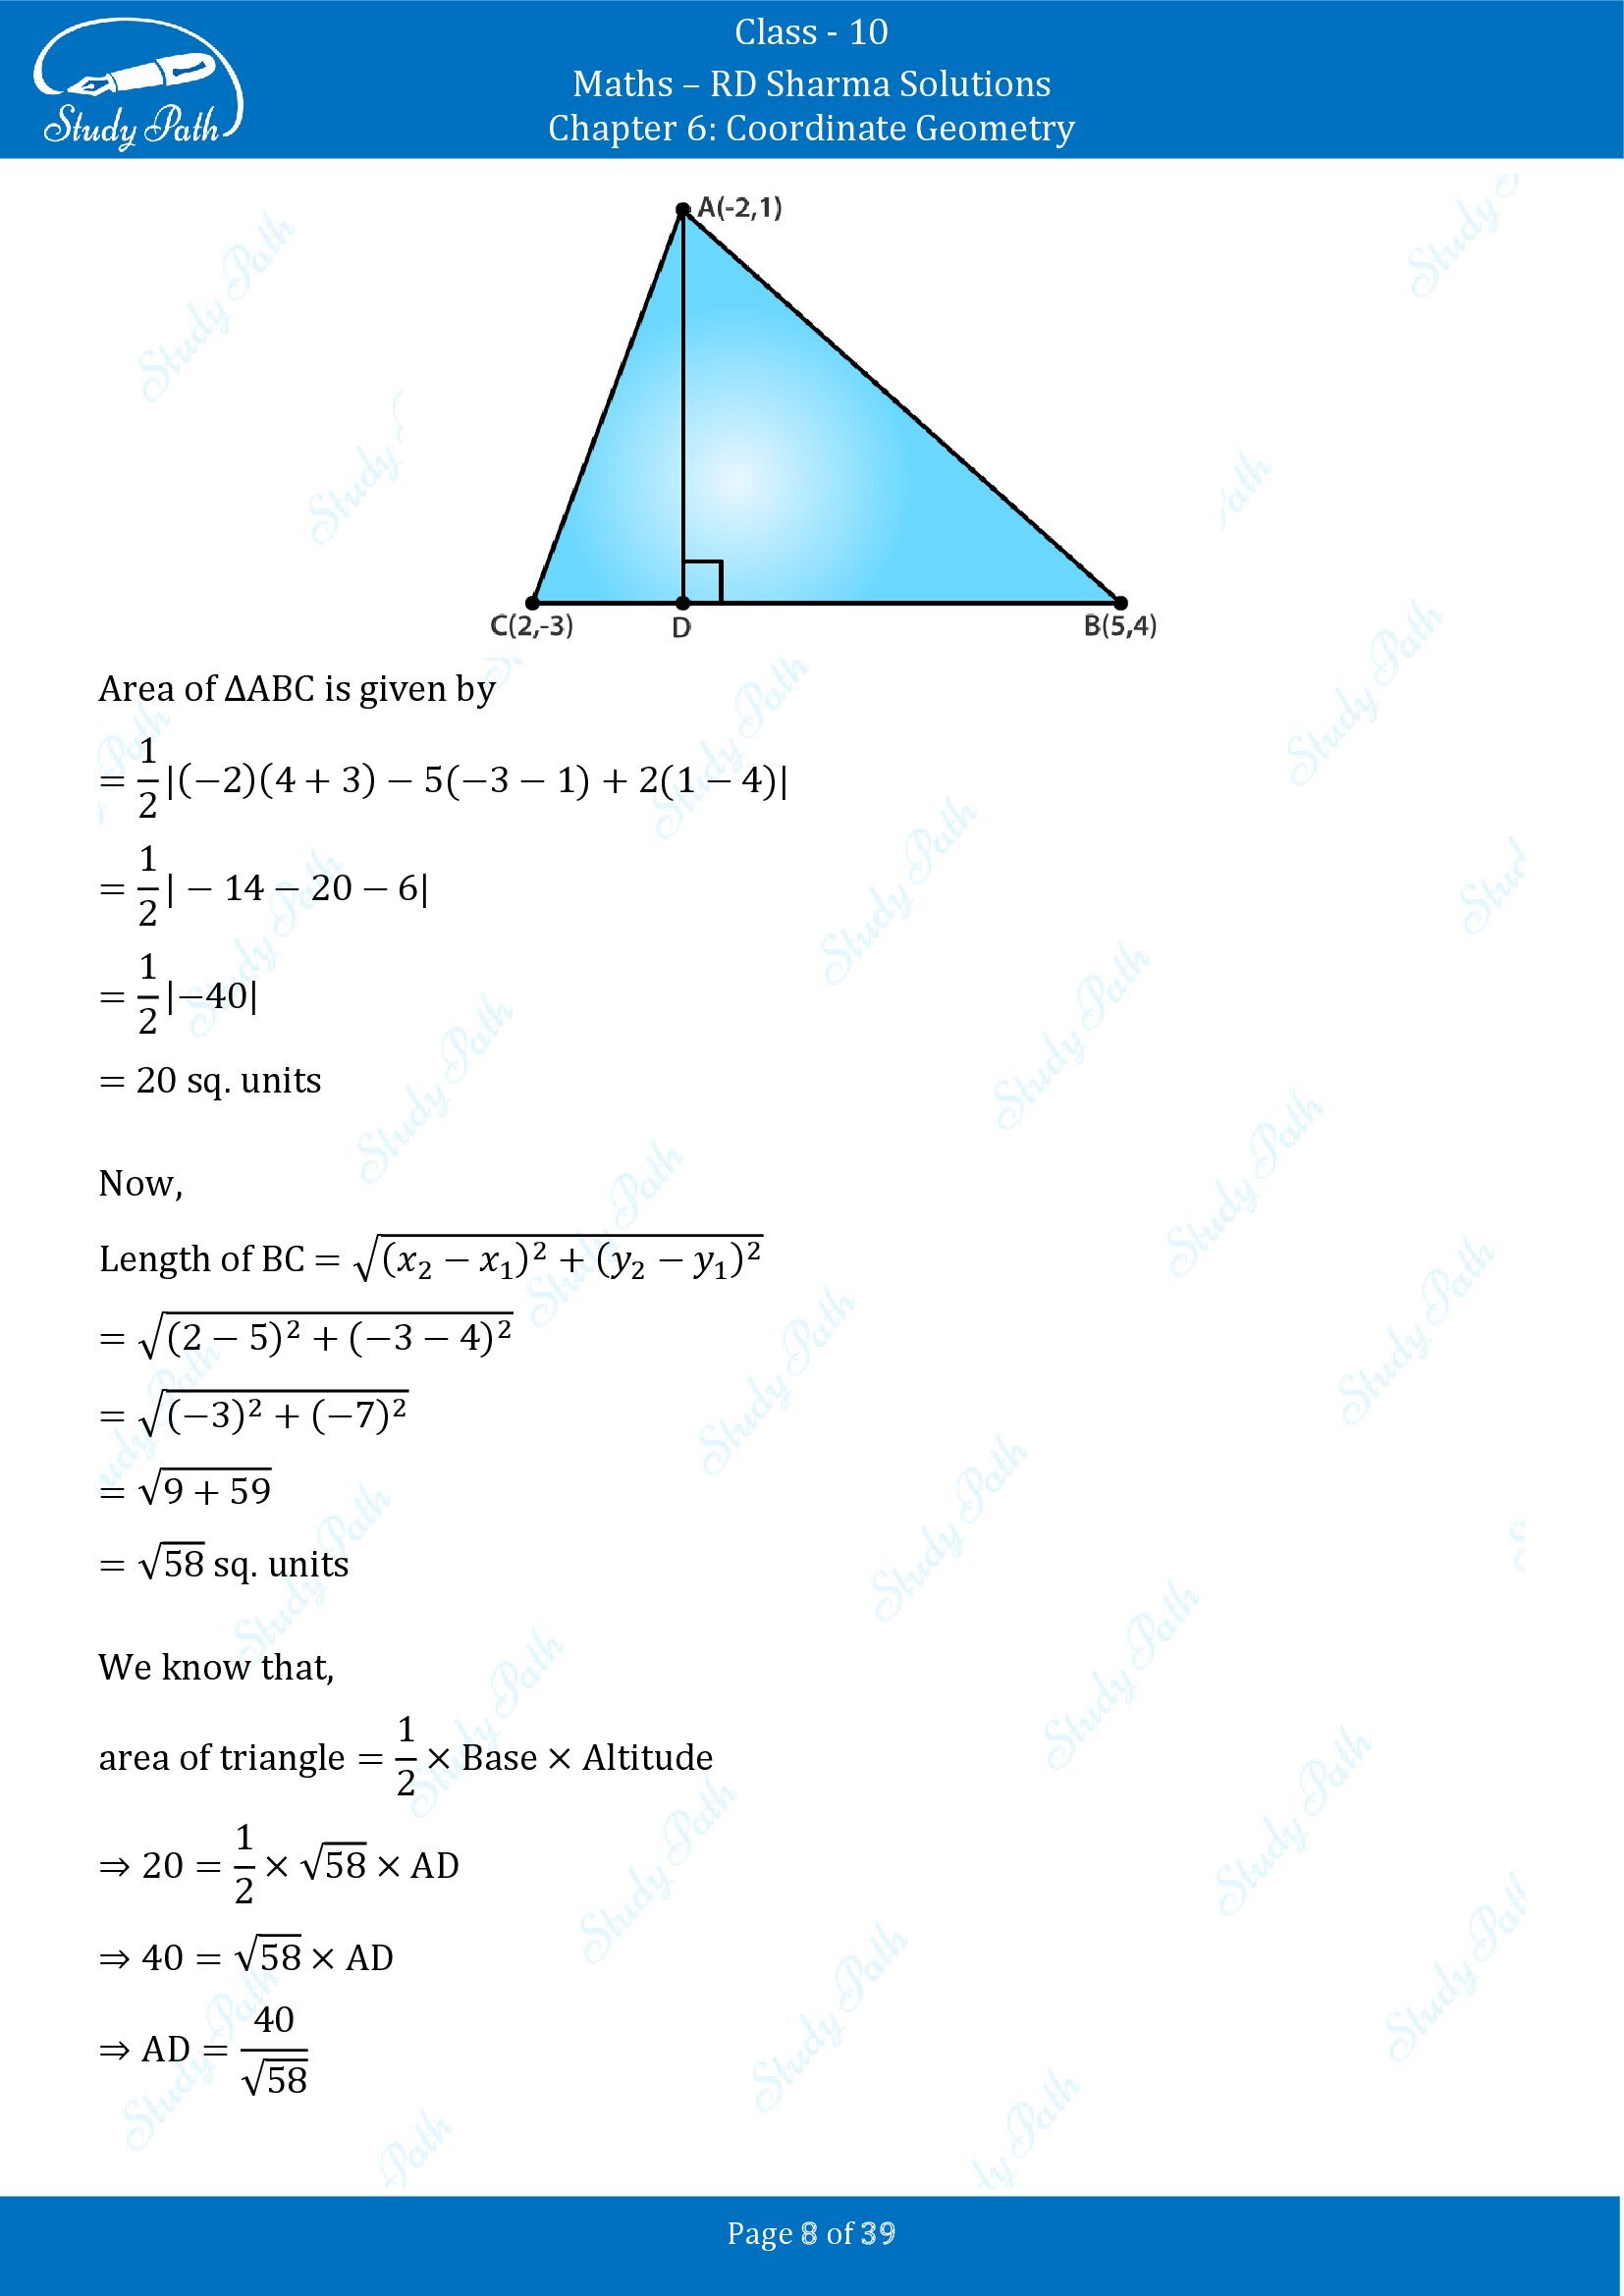 RD Sharma Solutions Class 10 Chapter 6 Coordinate Geometry Exercise 6.5 0008